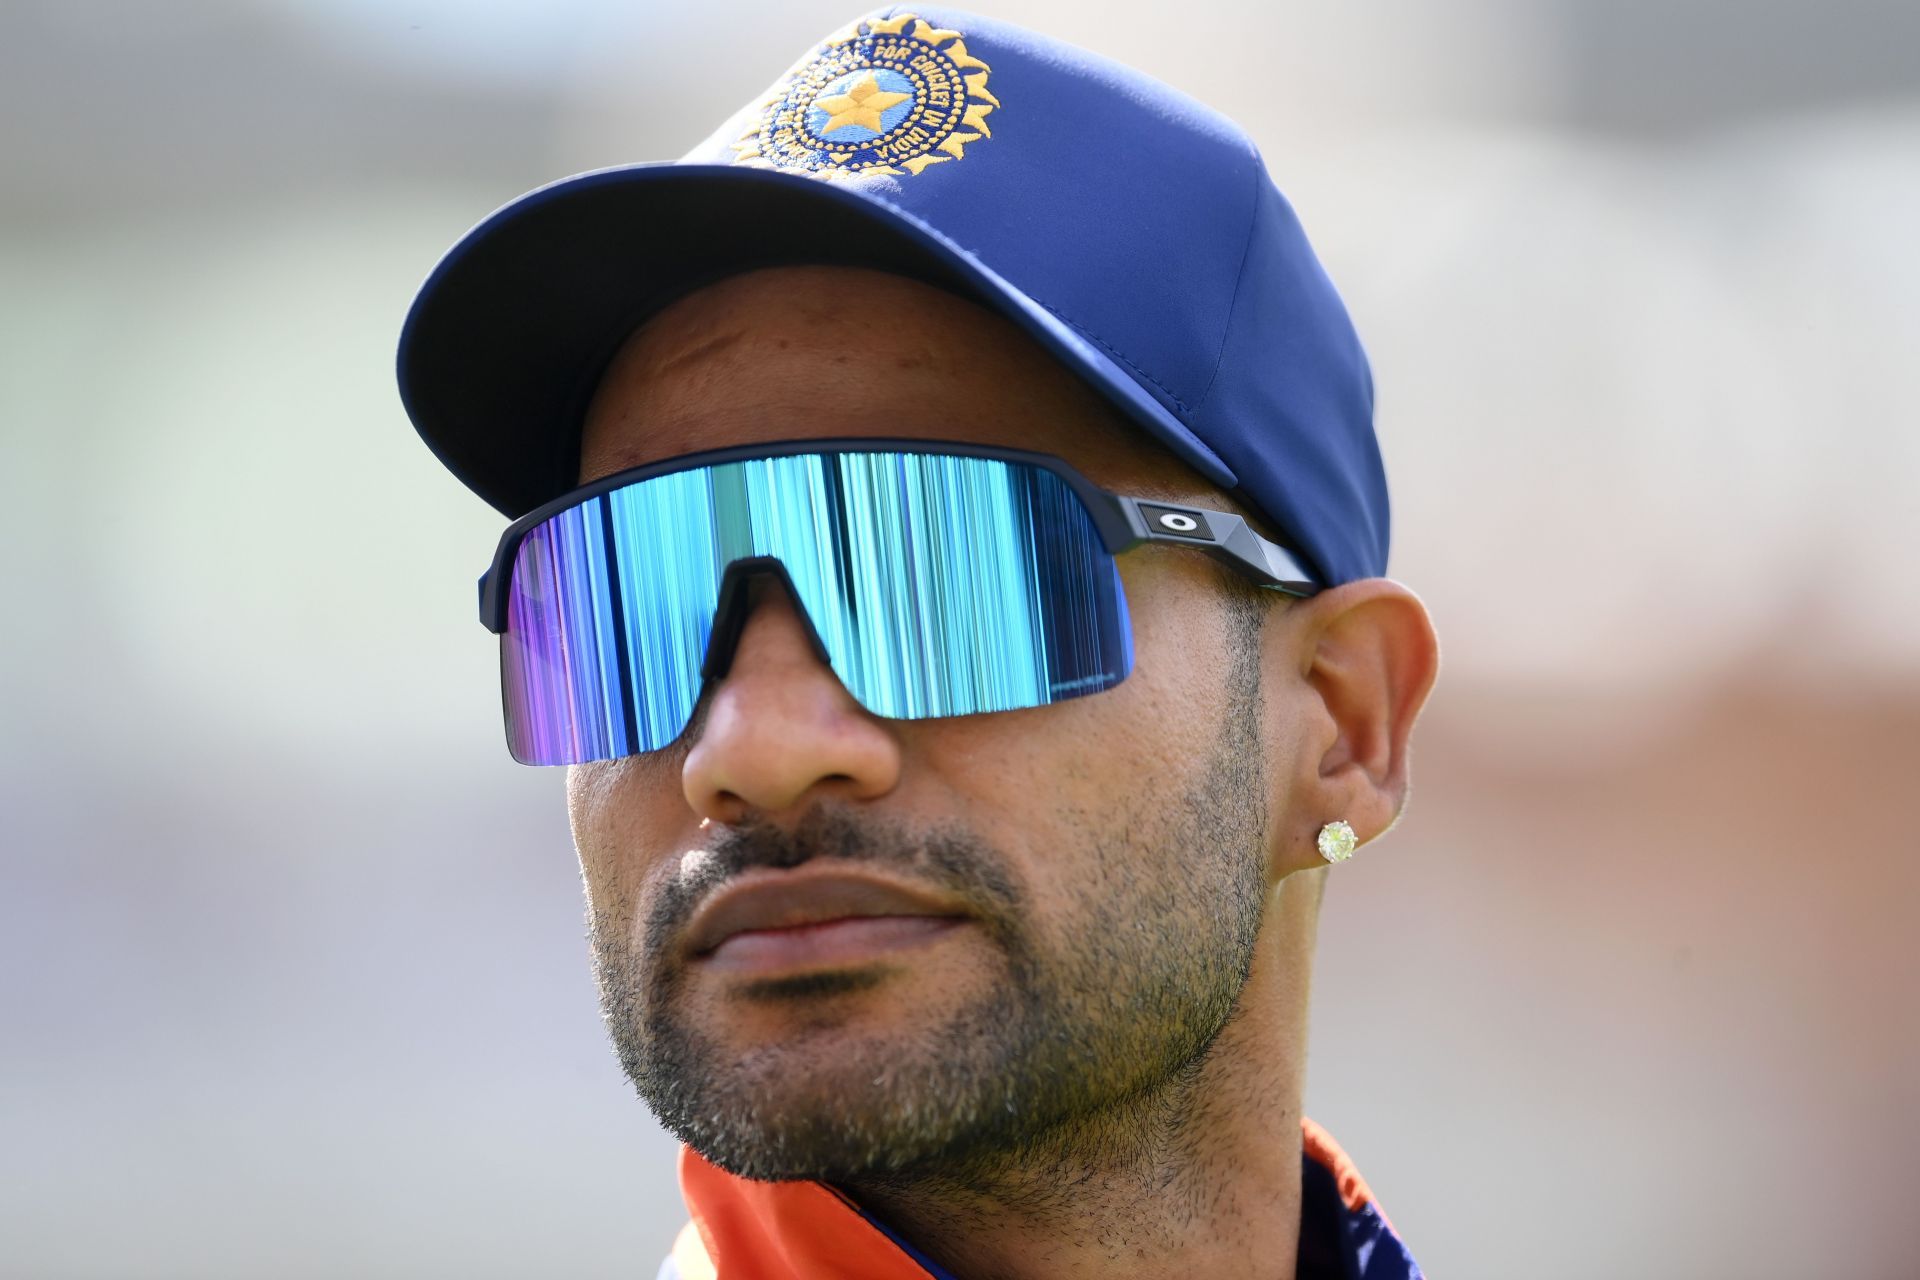 Shikhar Dhawan has a good record as Indian captain in ODI cricket. (Image: Getty)